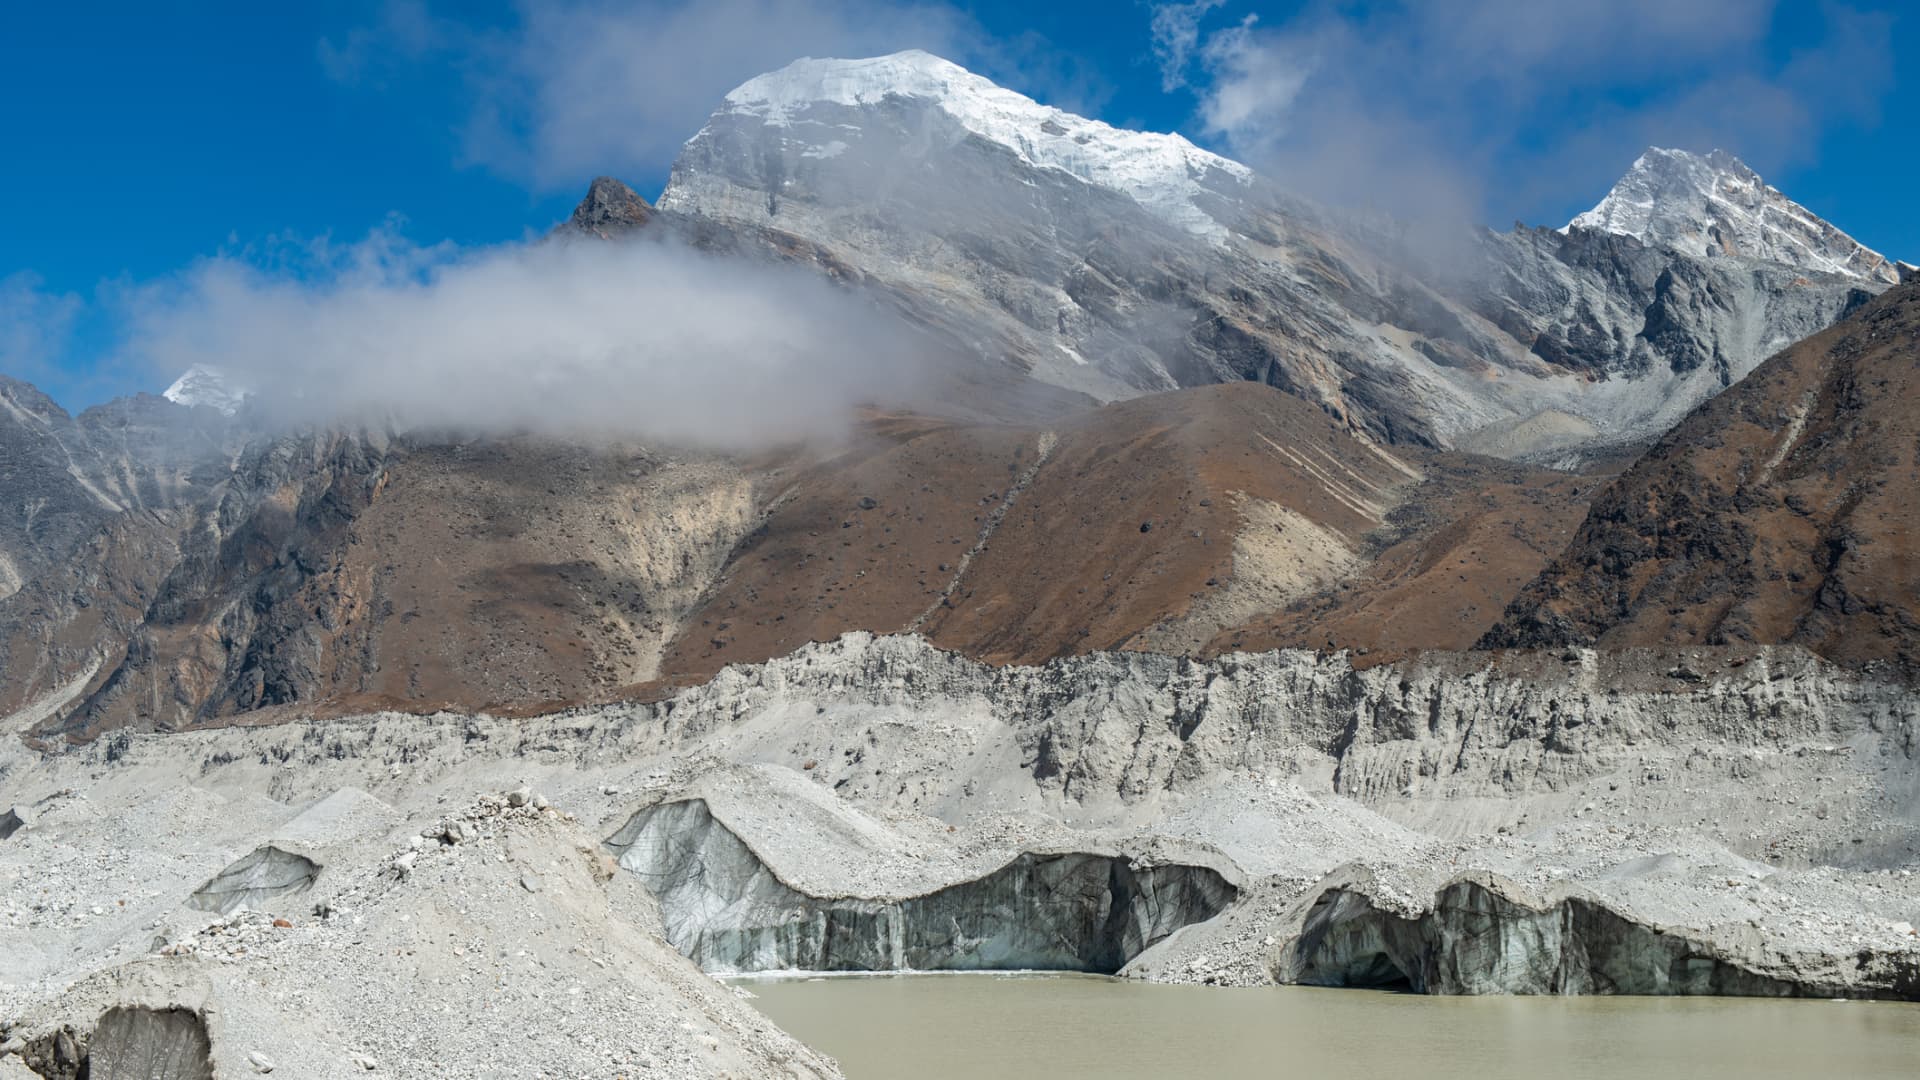 Glaciers are important indicators of global warming and climate change.